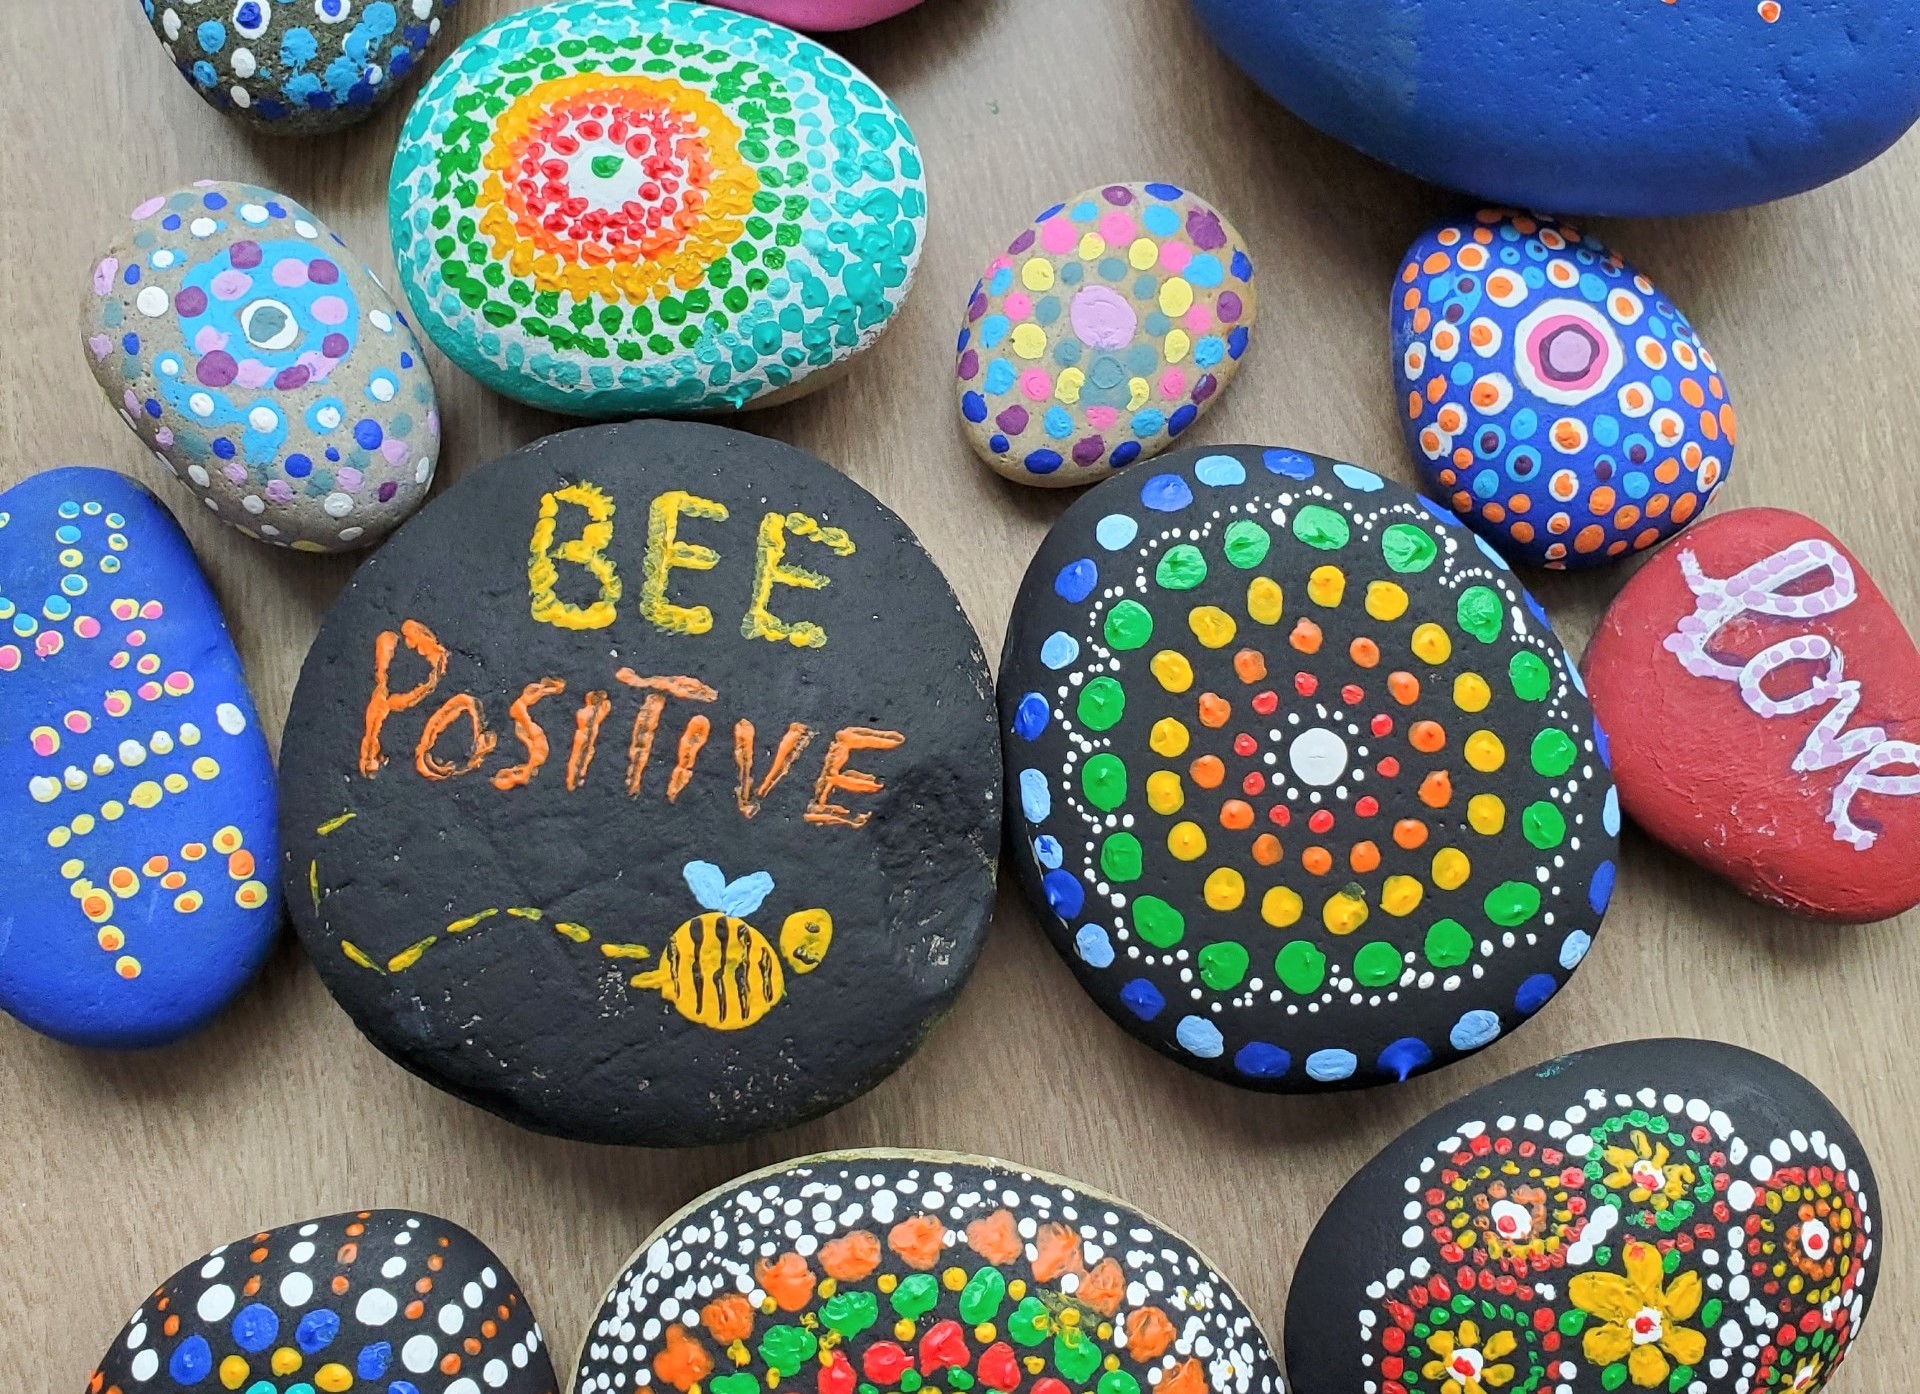 Kindness rocks for the community